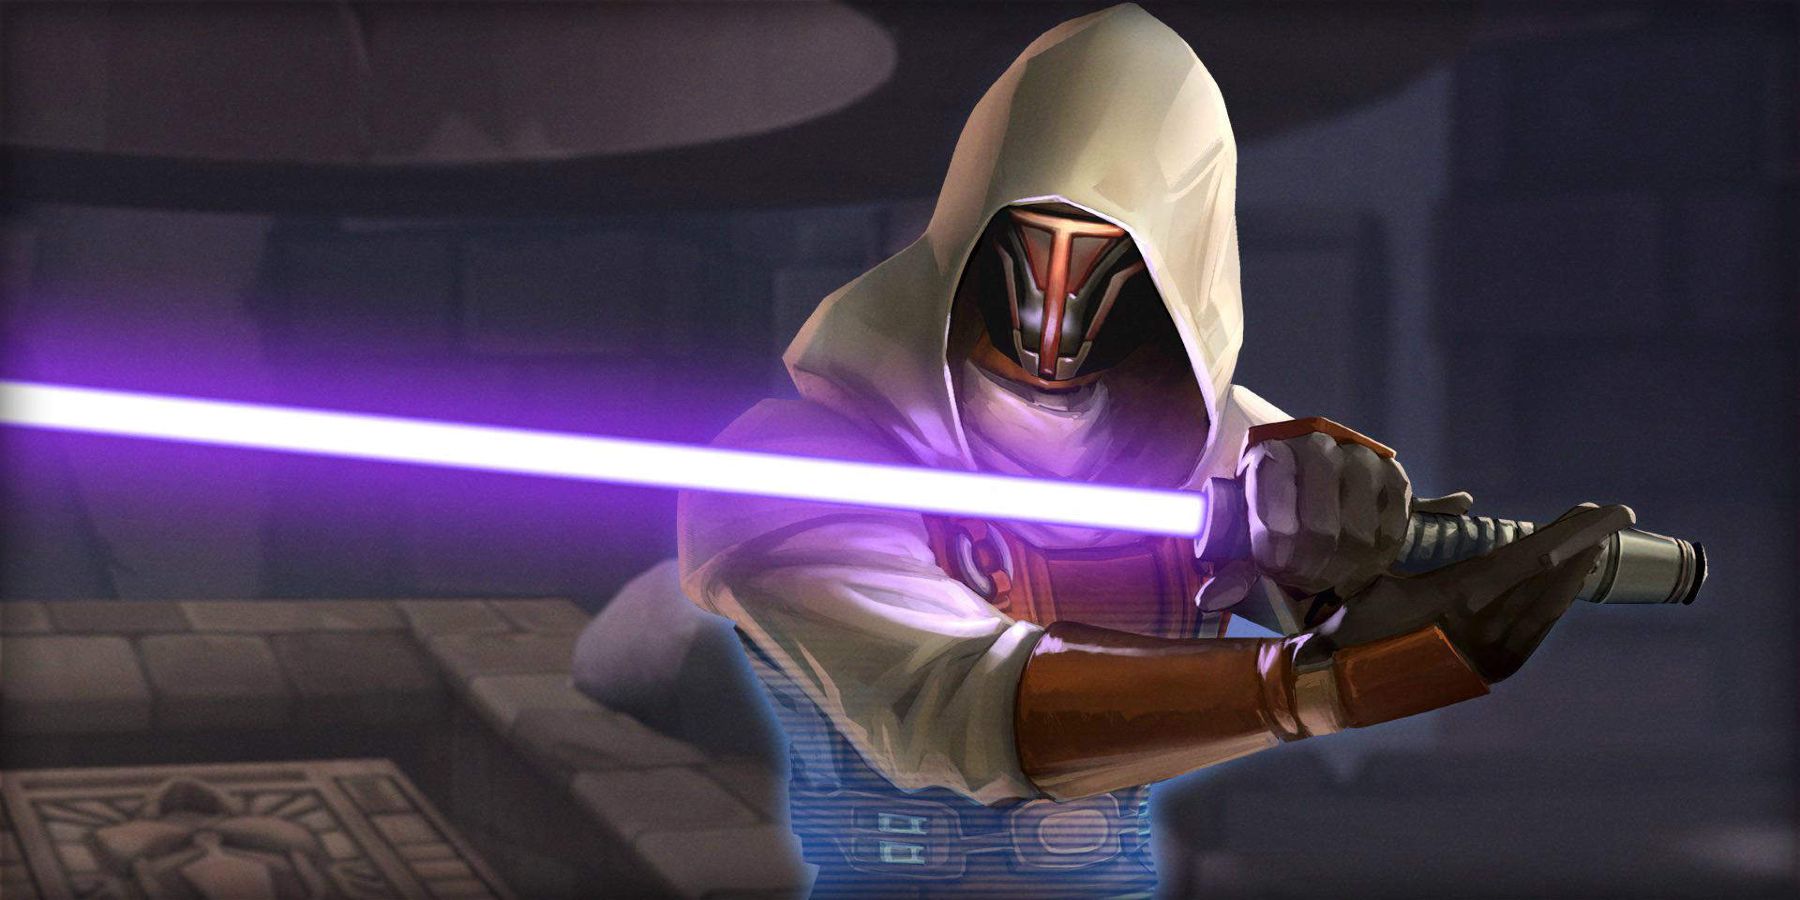 Darth Revan from Star Wars: Knights of the Old Republic.